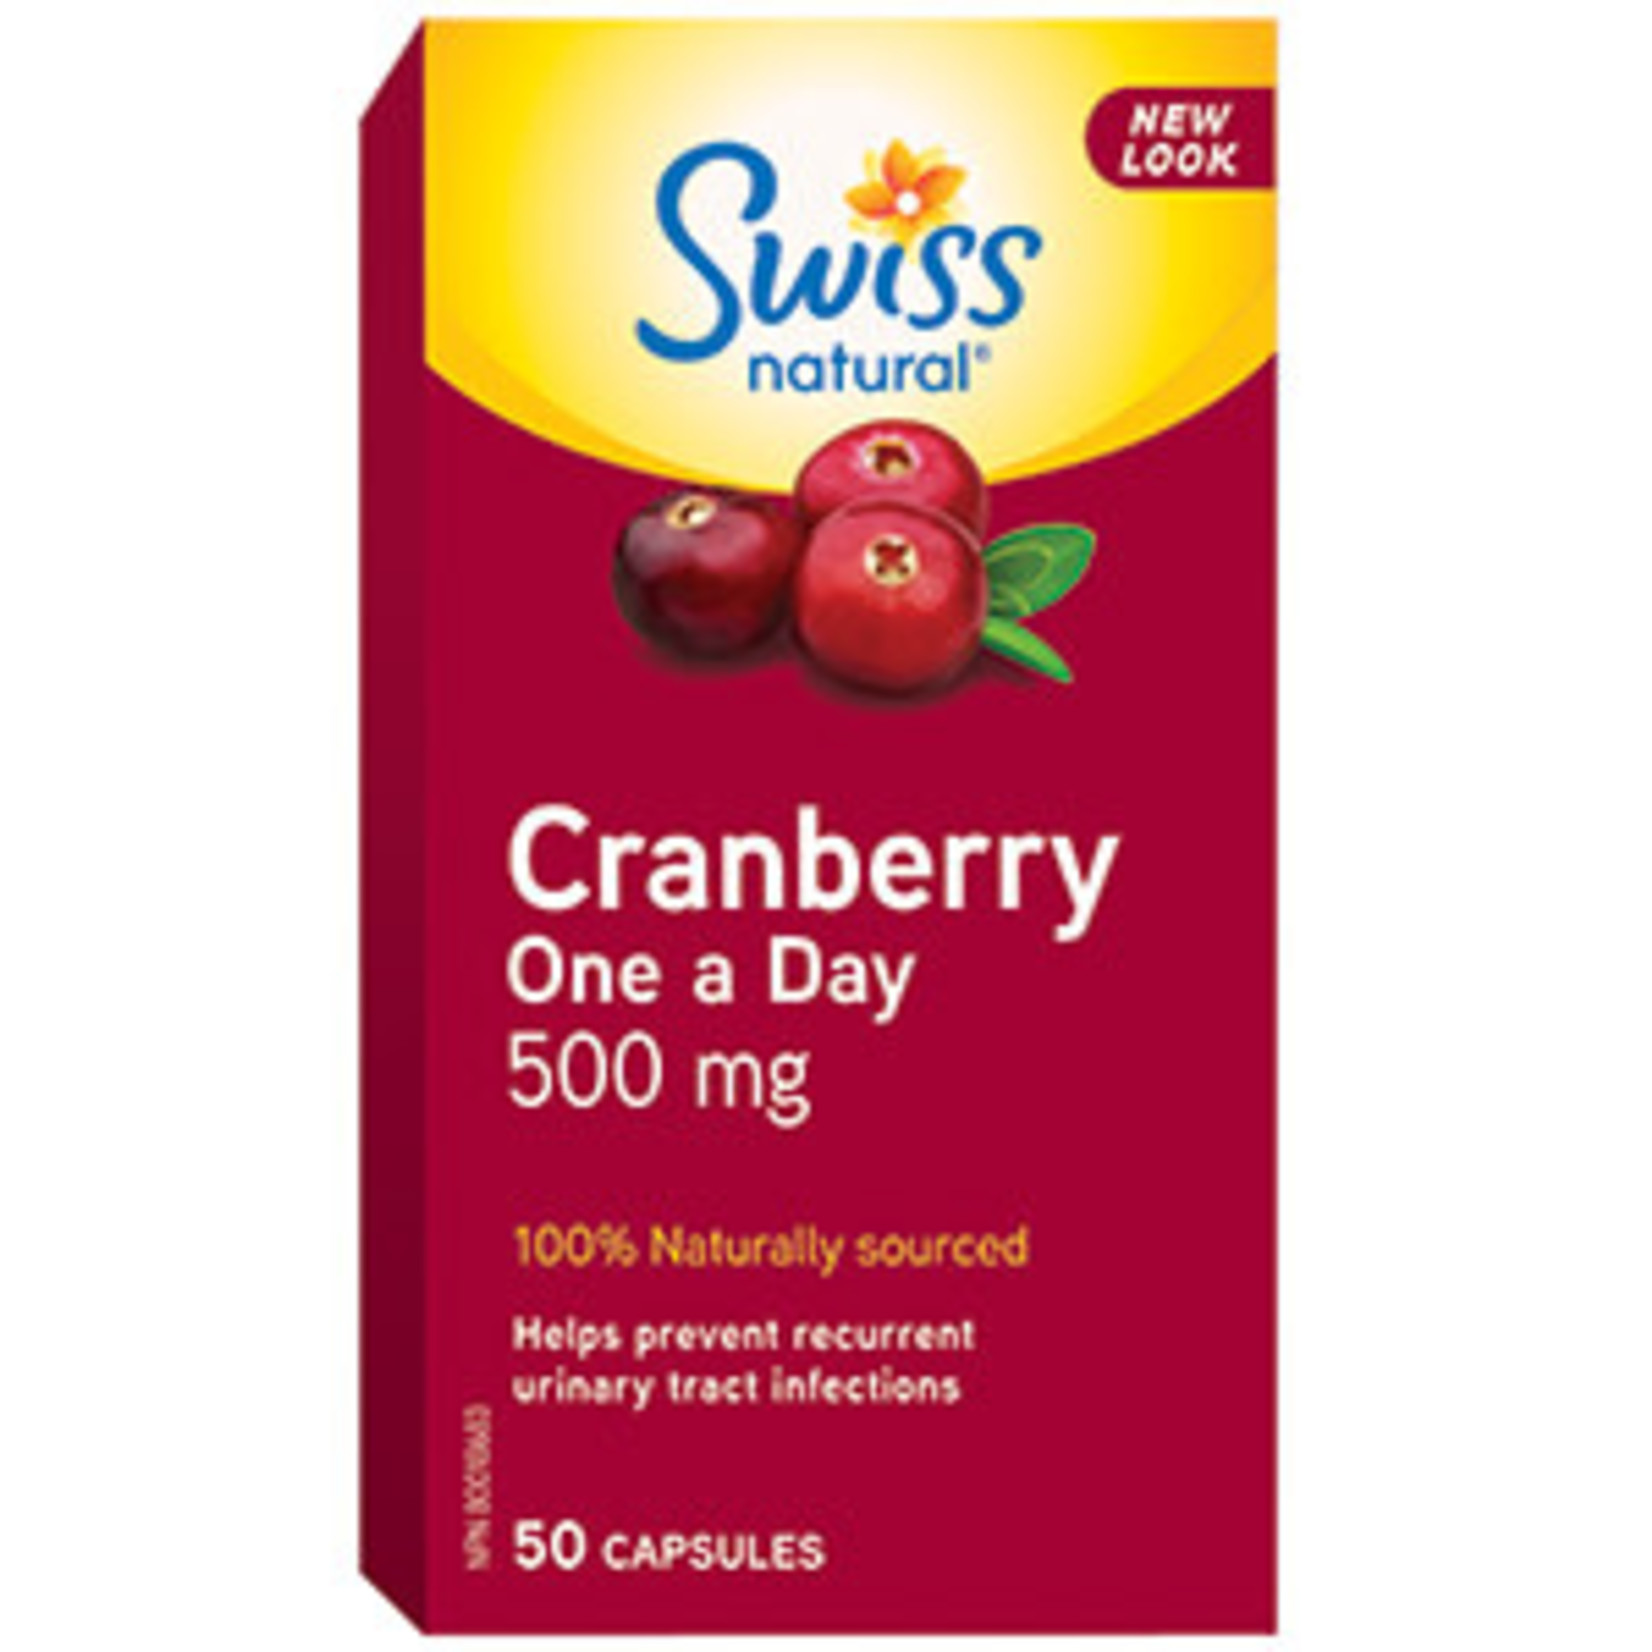 SWISS NATURAL SWISS NATURAL CRANBERRY ONE A DAY 500MG 50 CAPS